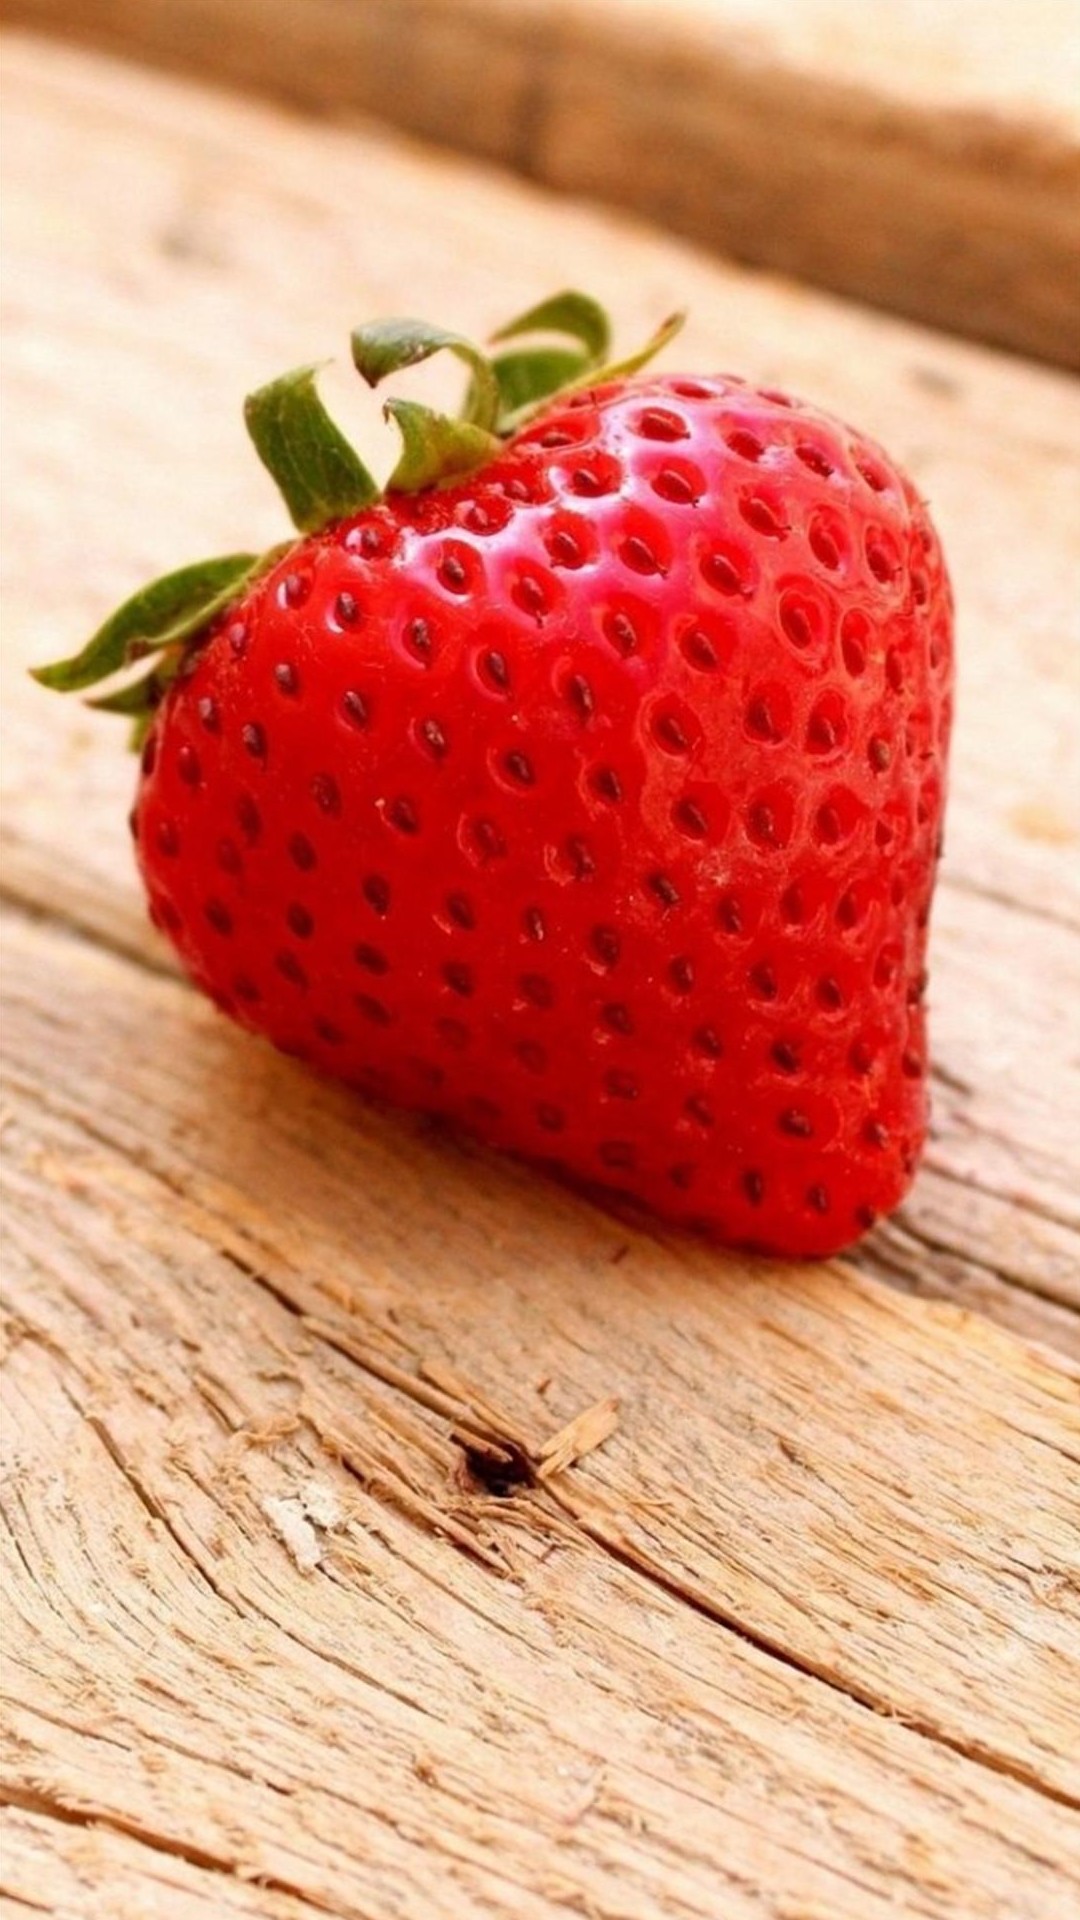 strawberry wallpaper for iphone,strawberry,strawberries,natural foods,fruit,berry